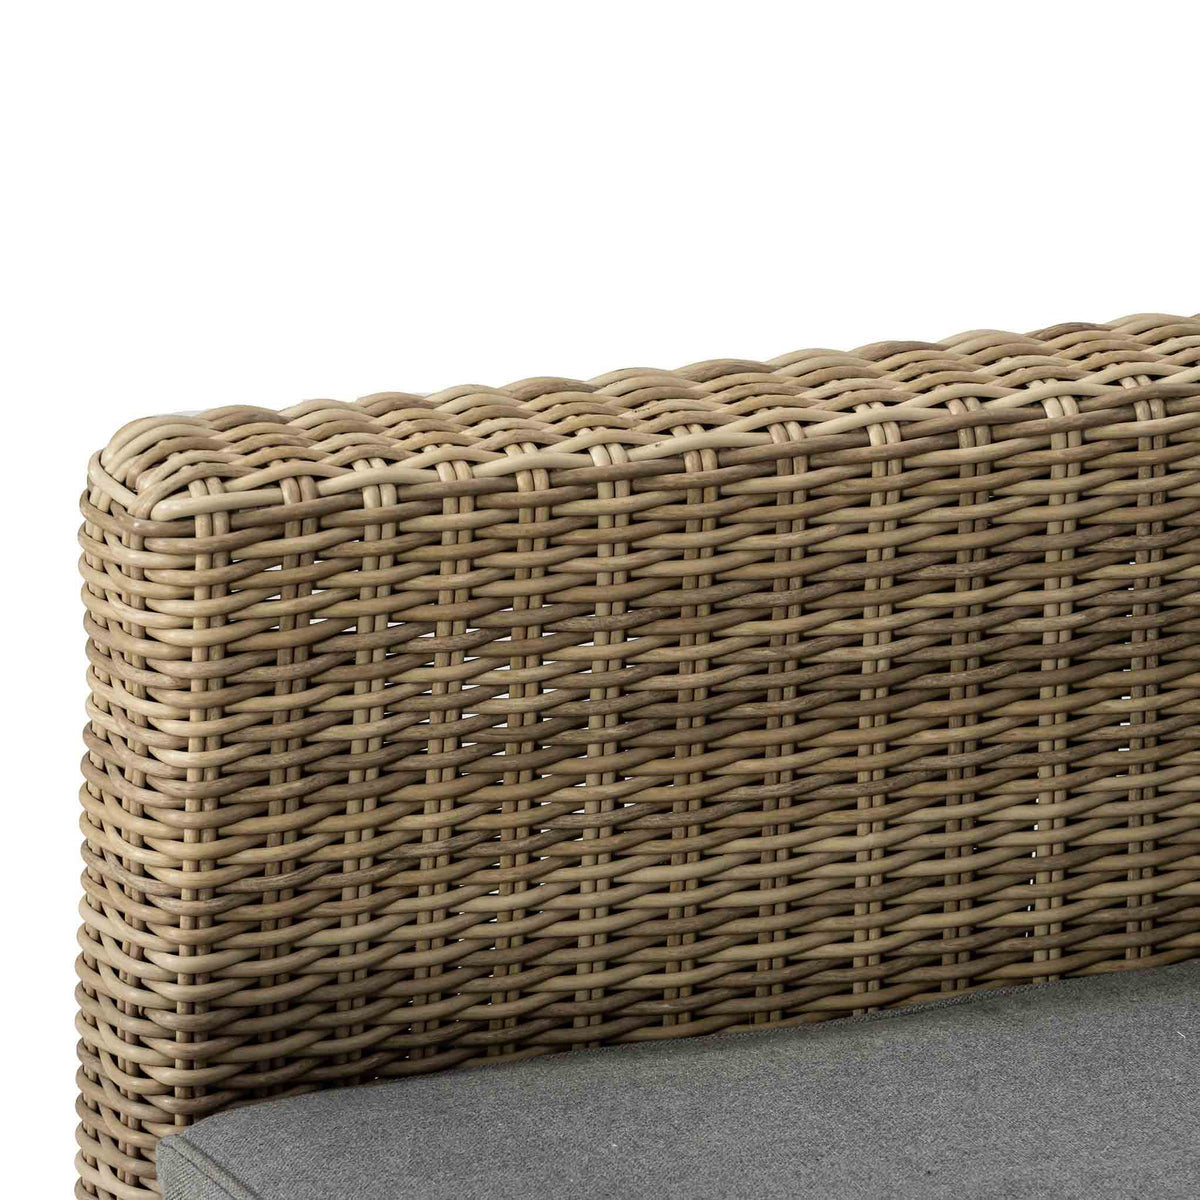 Wentworth Deluxe Rattan Sofa Garden Lounge Set with Adjustable Table - Close up of Arm of Sofa